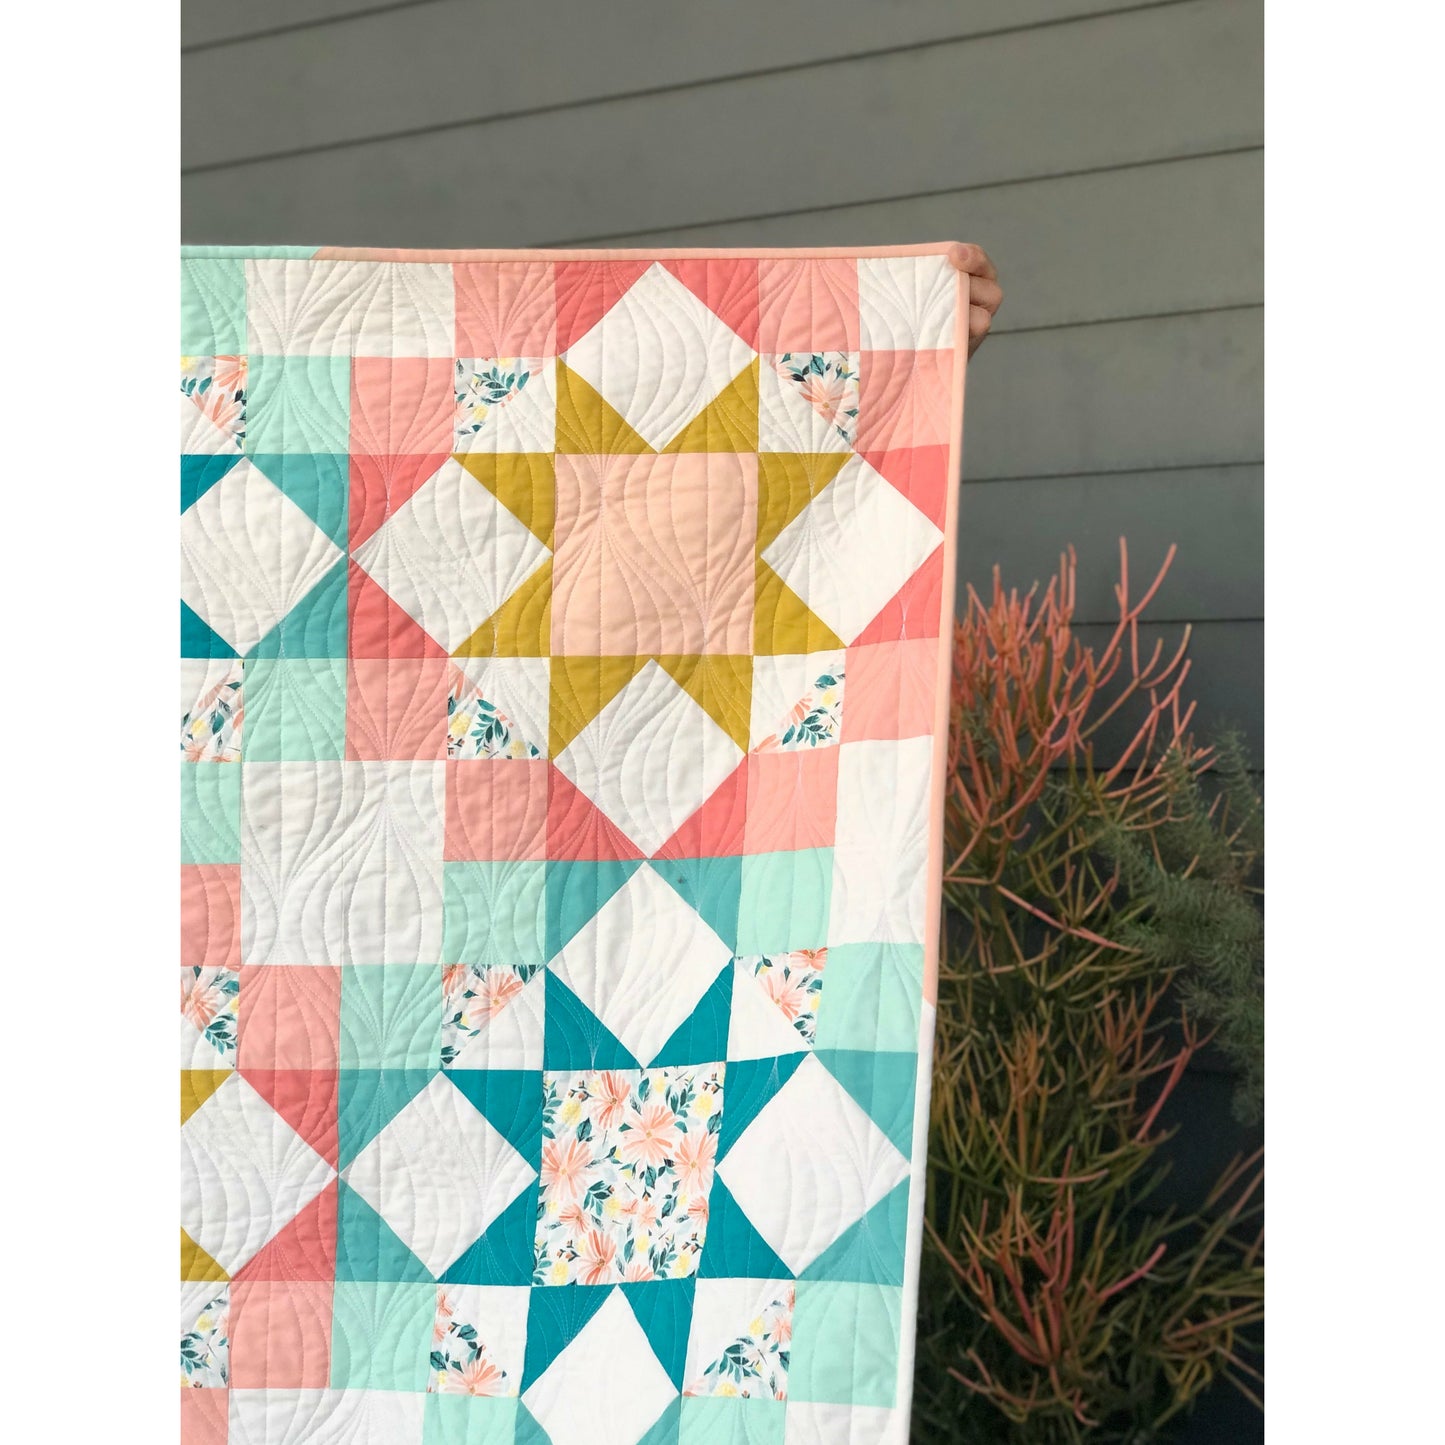 Handmade Journey Home Quilt- Throw size, 100% Cotton, Professionally Quilted